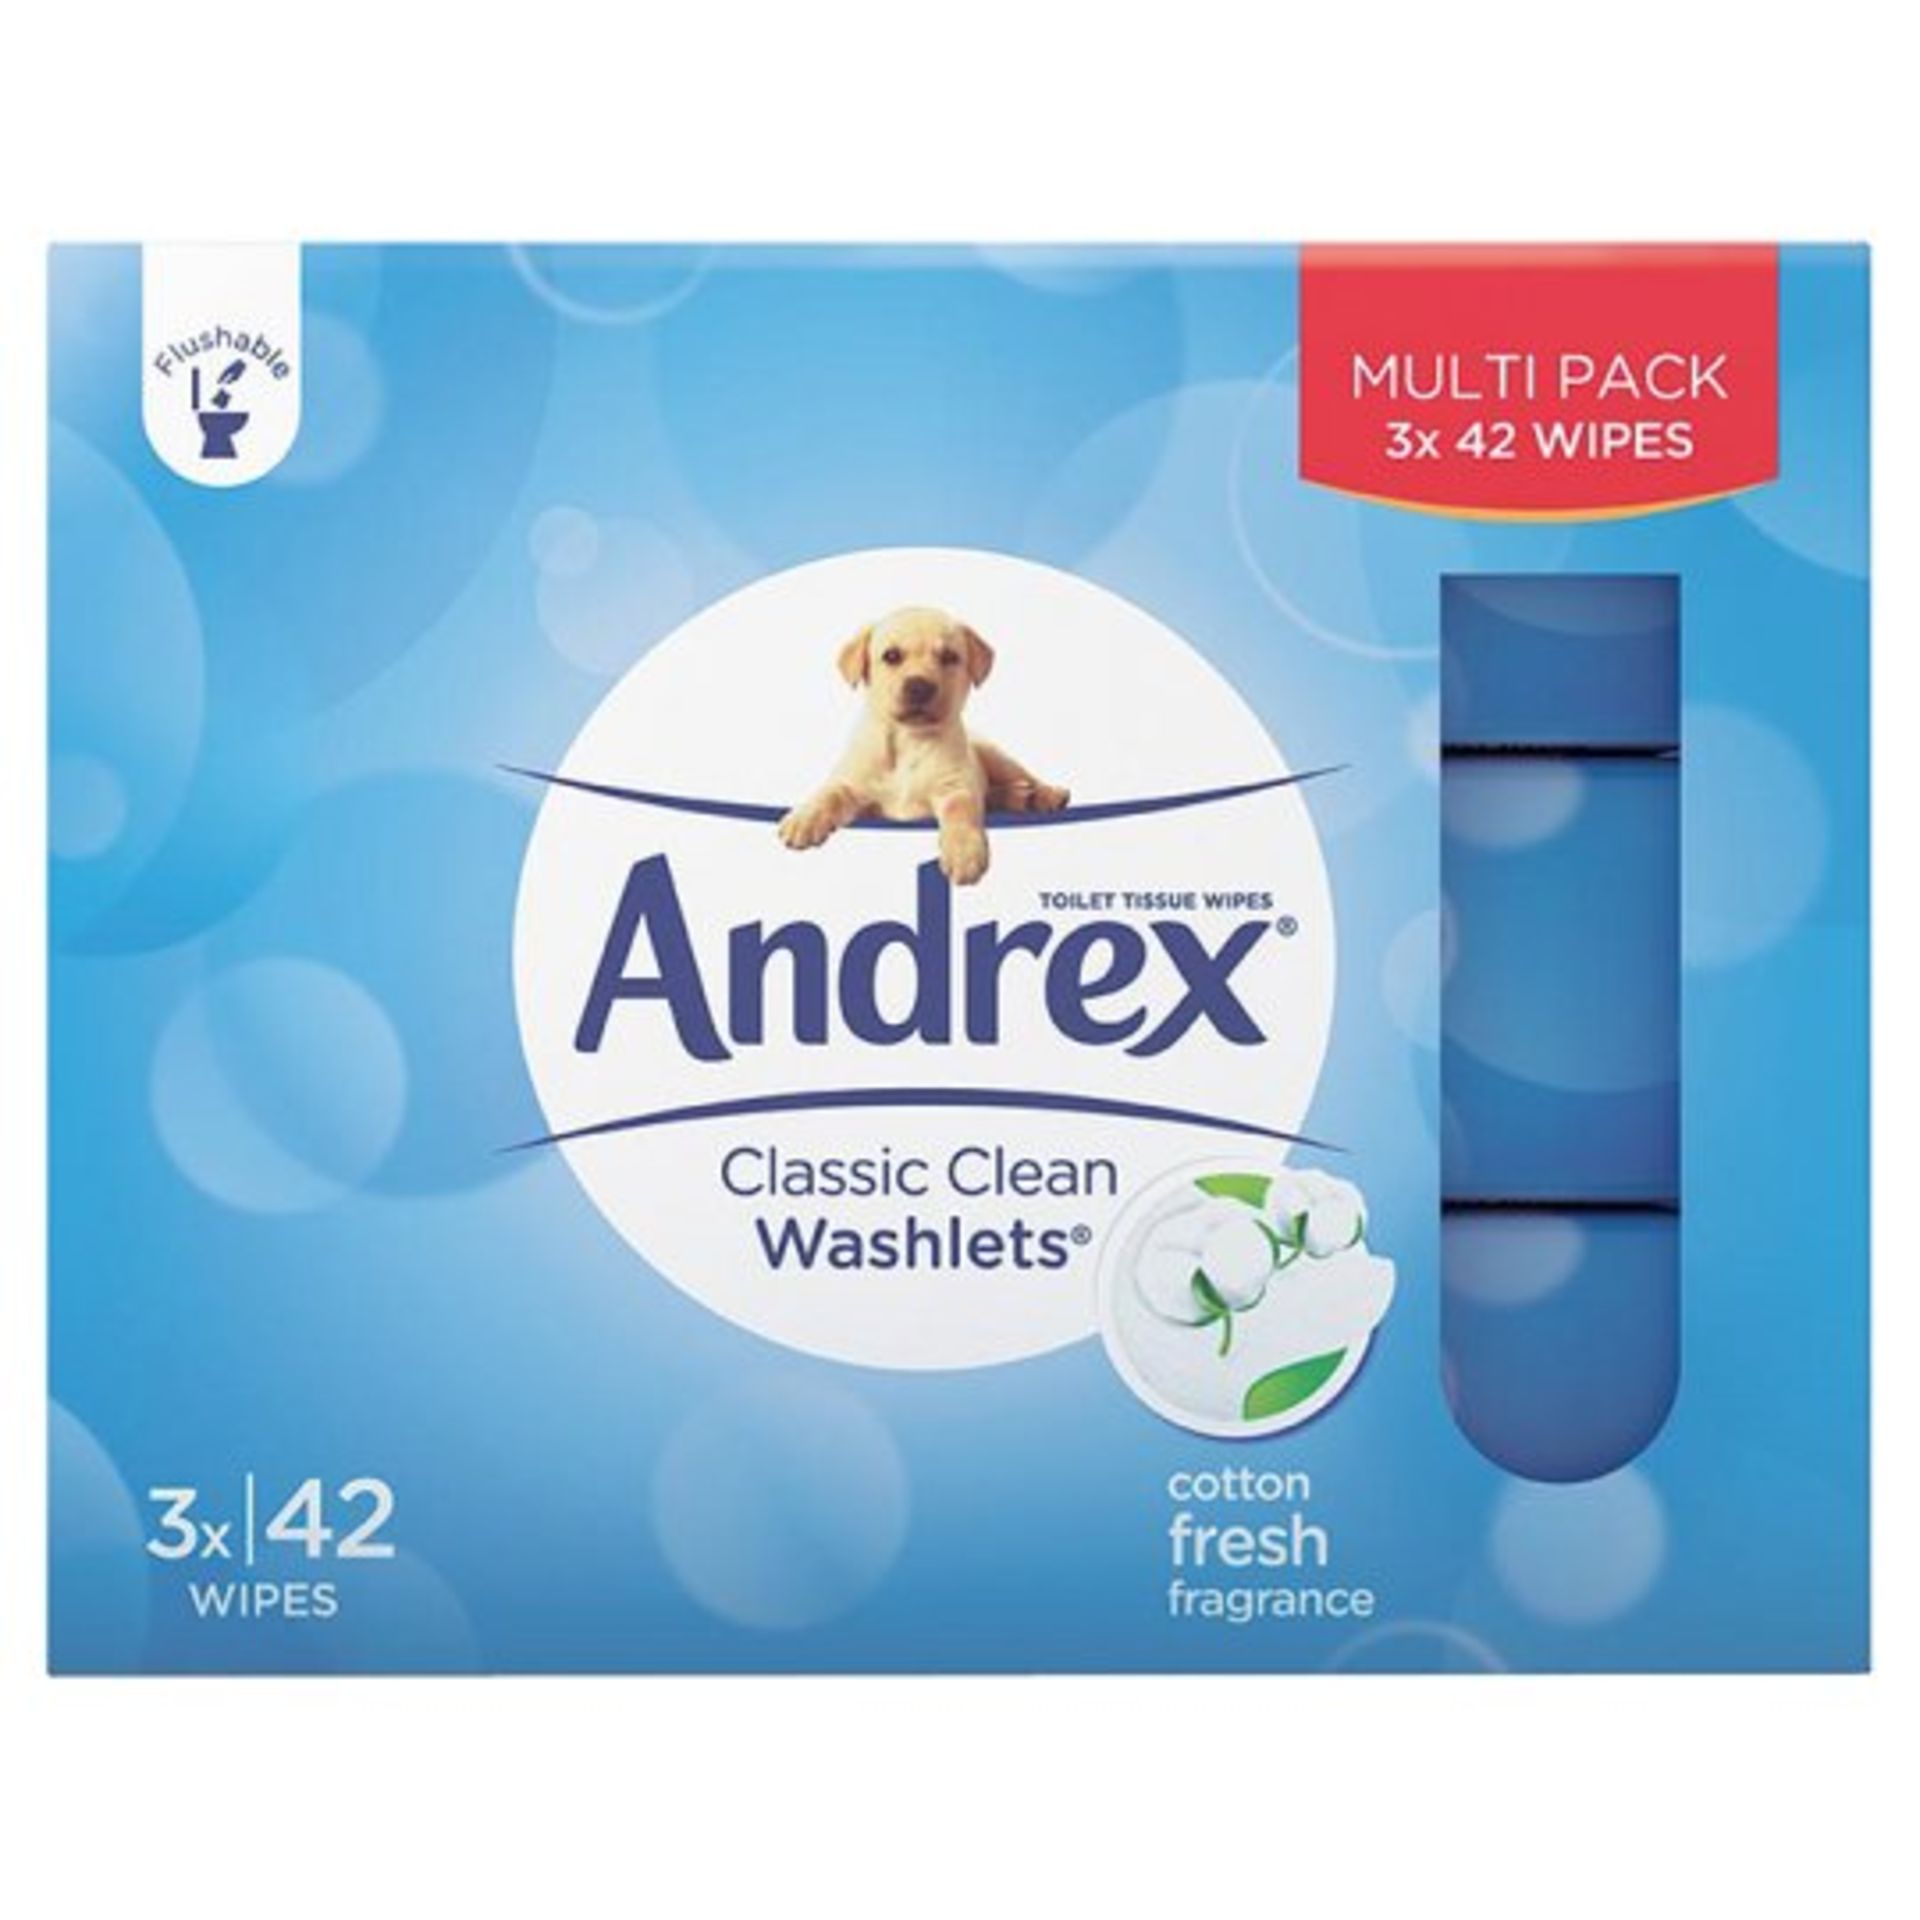 V *TRADE QTY* Brand New Andrex Classic Clean Washlets 3 Pack X 5 YOUR BID PRICE TO BE MULTIPLIED